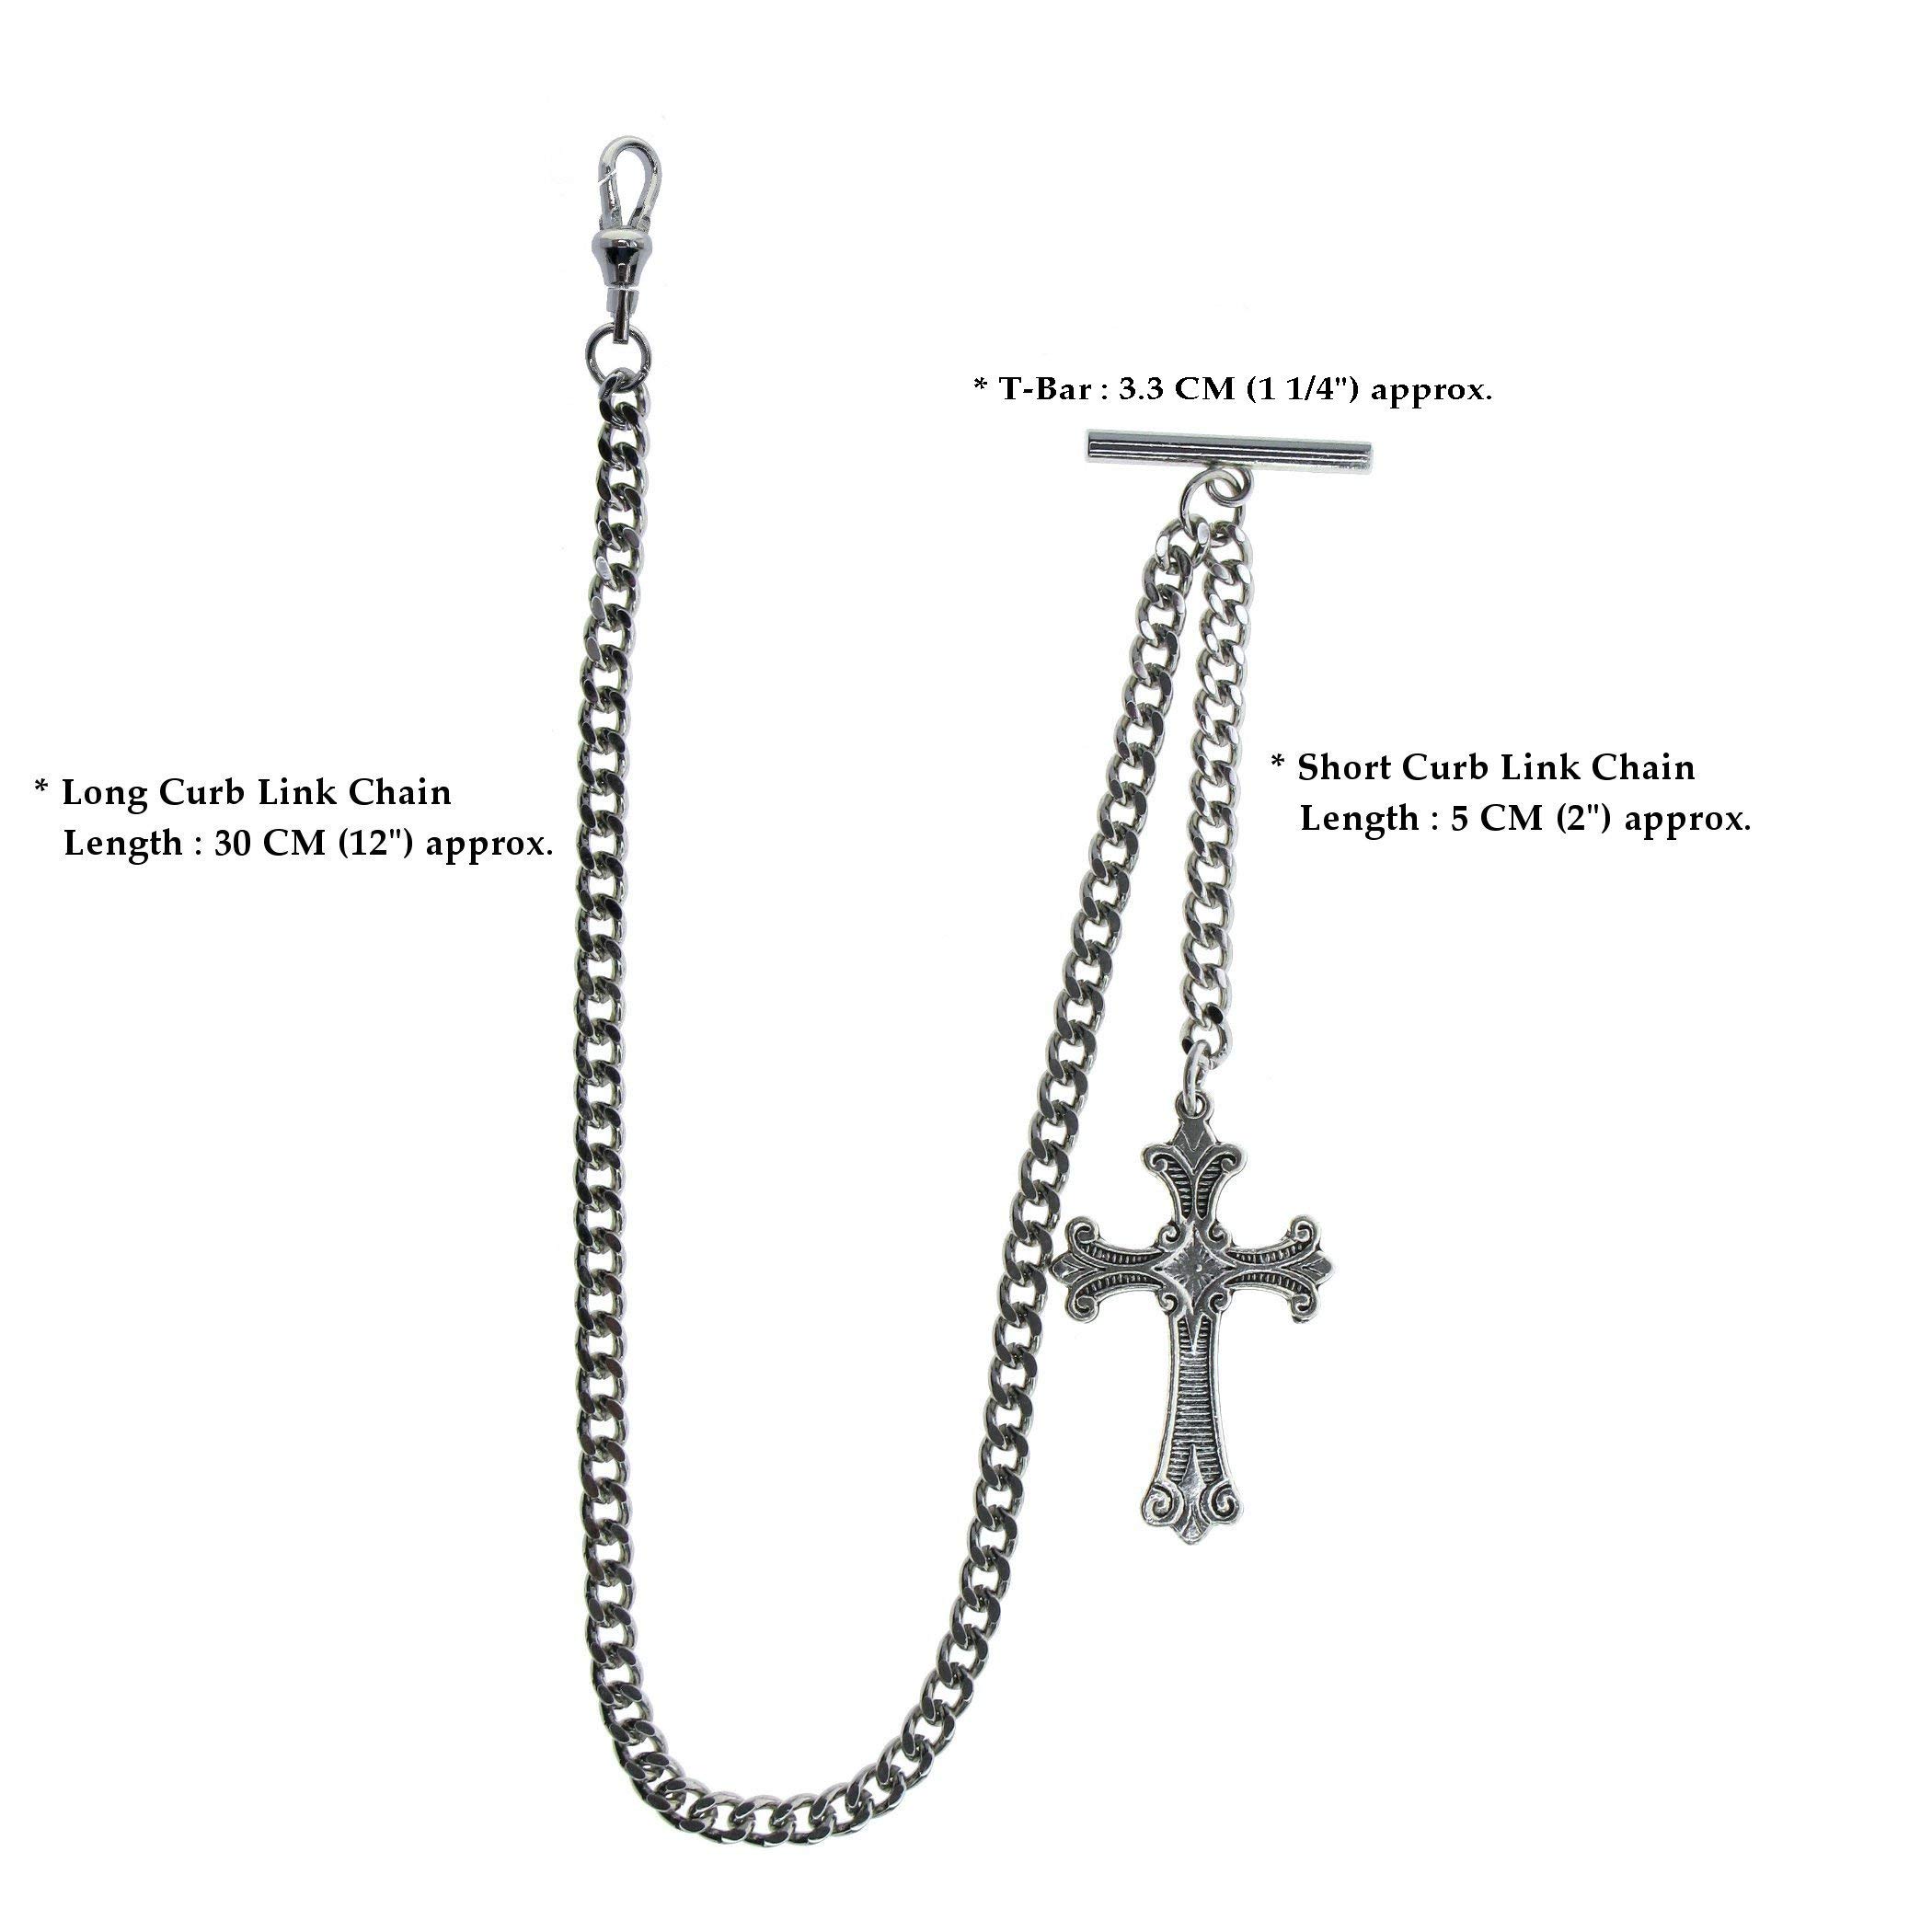 Albert Chain Silver Pocket Watch Chain Fob Chain with Religious Cross Design Fob and Swivel Clasp T Bar AC114A